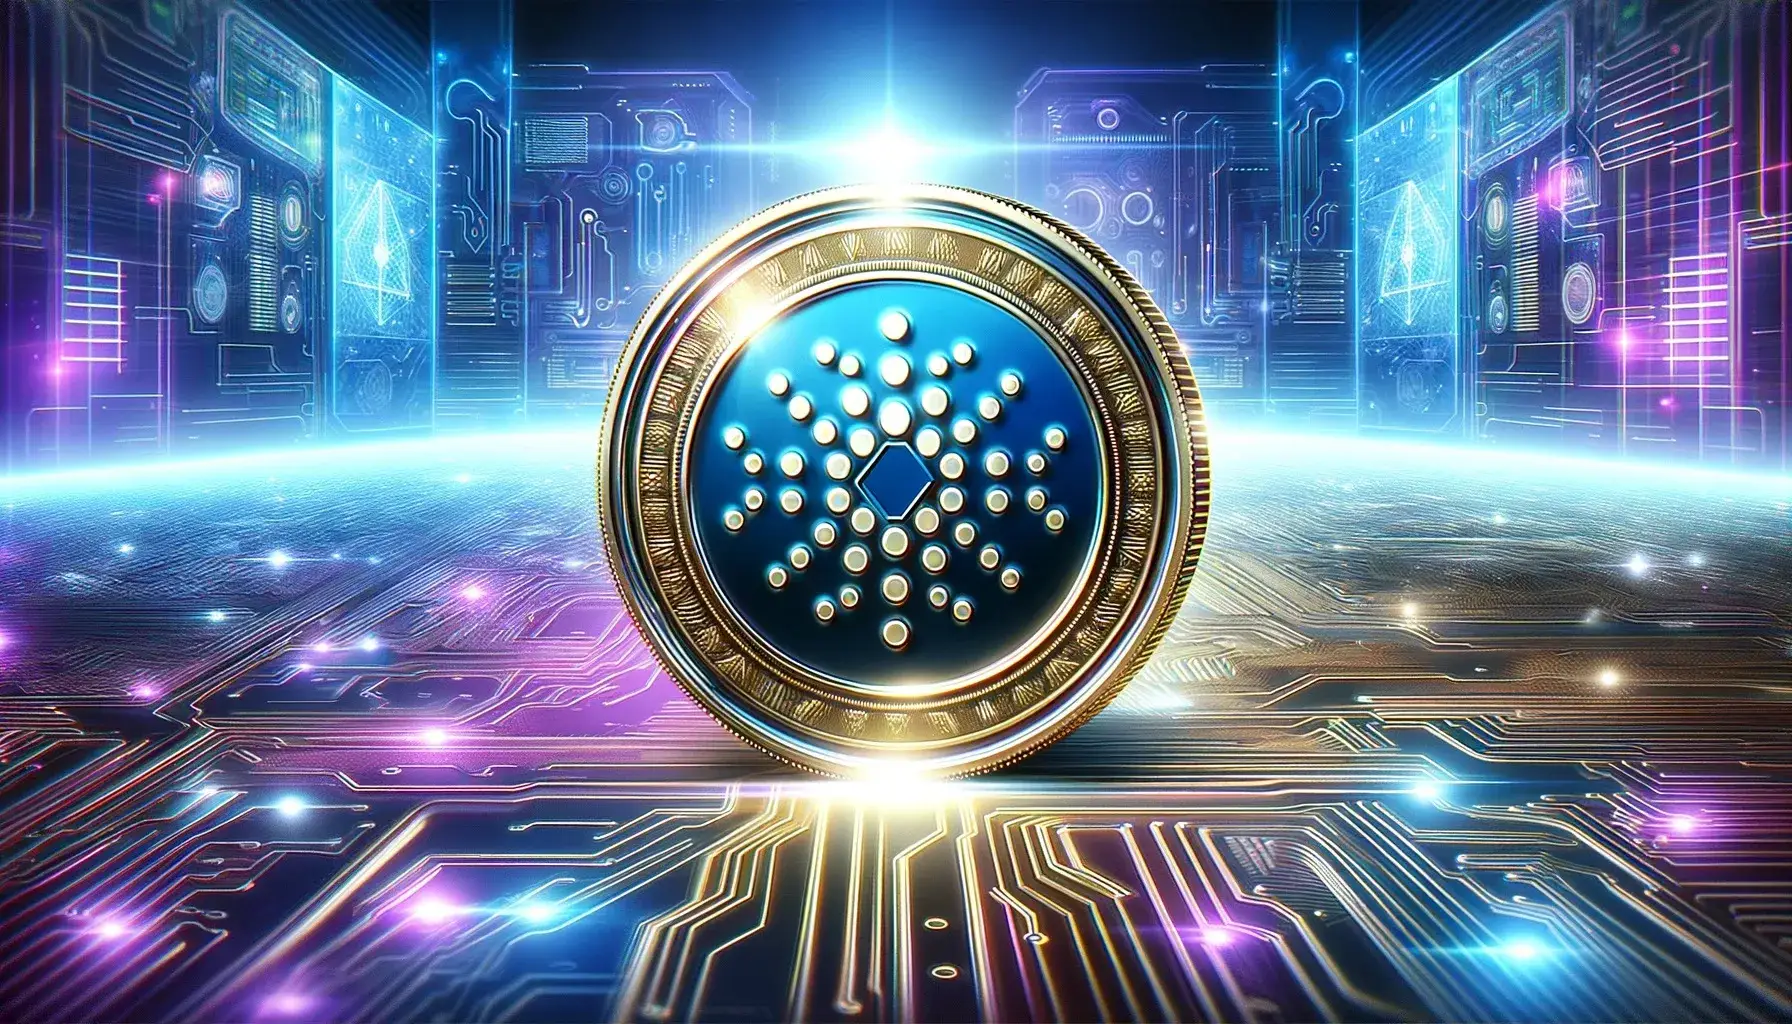 Cardano (ADA) Potential Sell Signal Identified: Technical Analysis